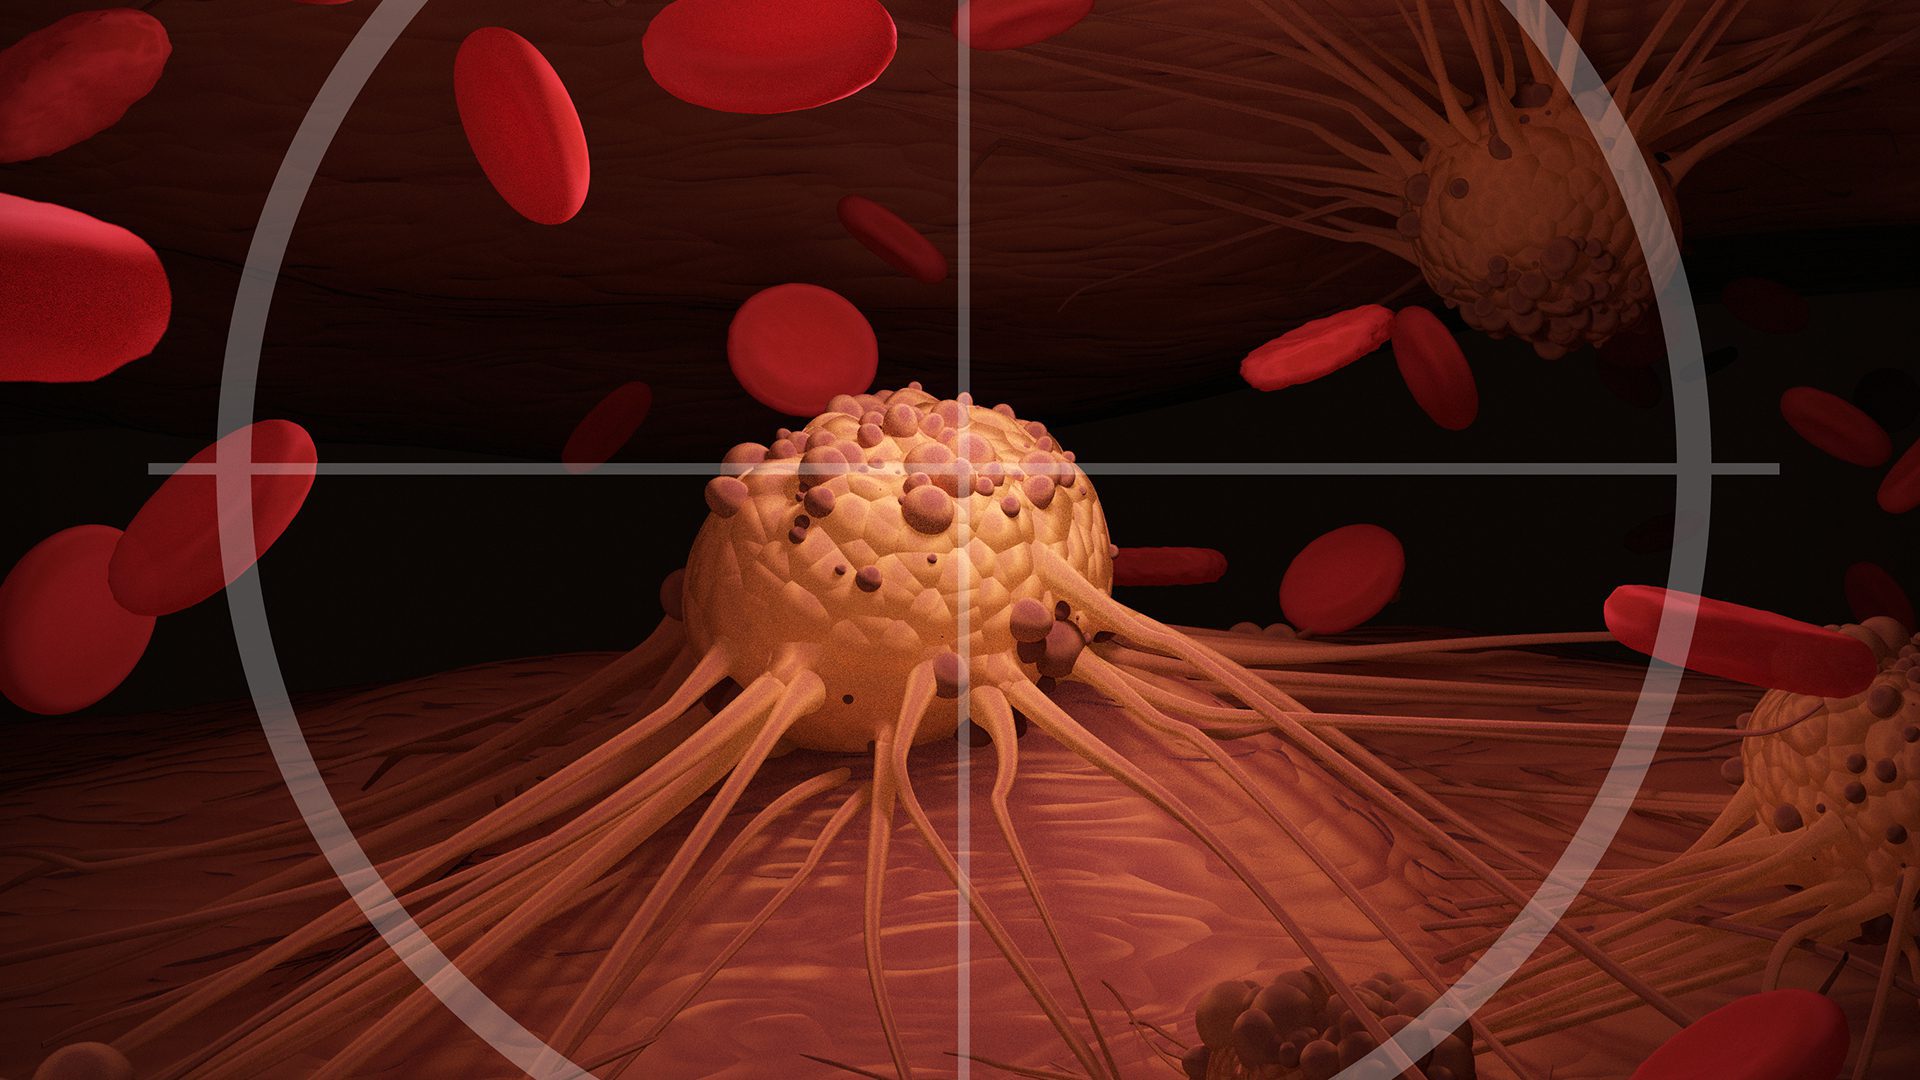 Accurately identifying and predicting synthetic lethal partnerships, to combat cancerous cells